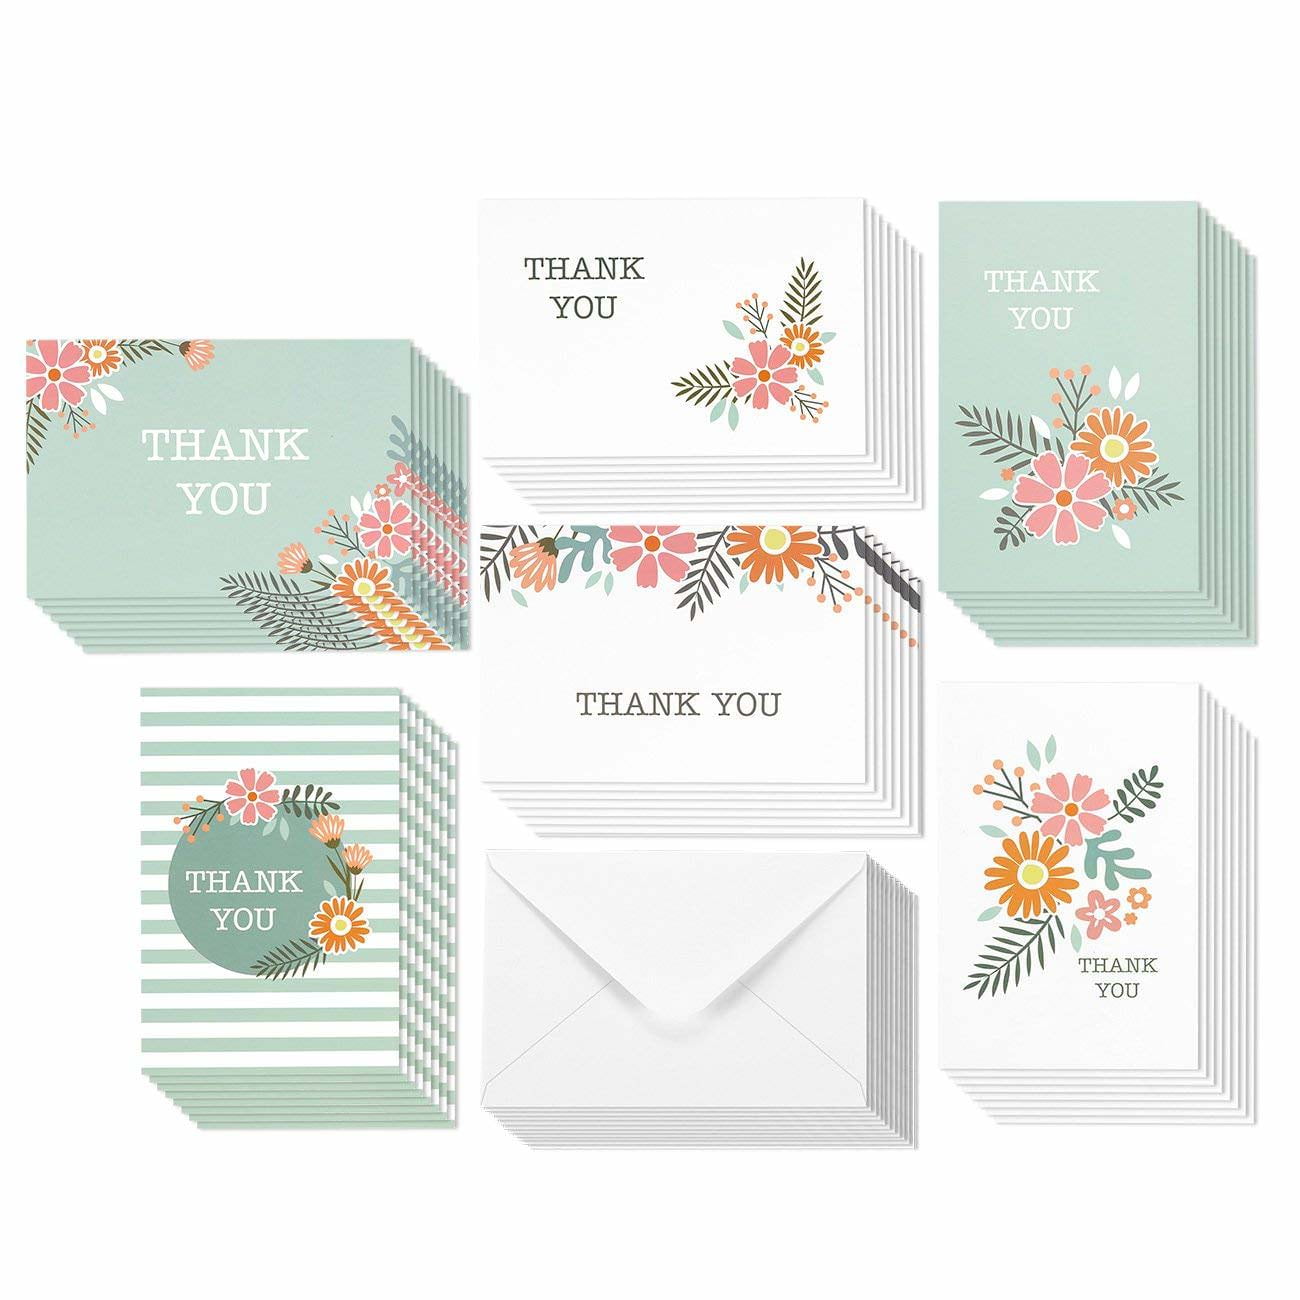 Thank You Cards Bulk - 48-Pack Thank You Cards, 6 Feminine Floral Designs, Thank You Notes